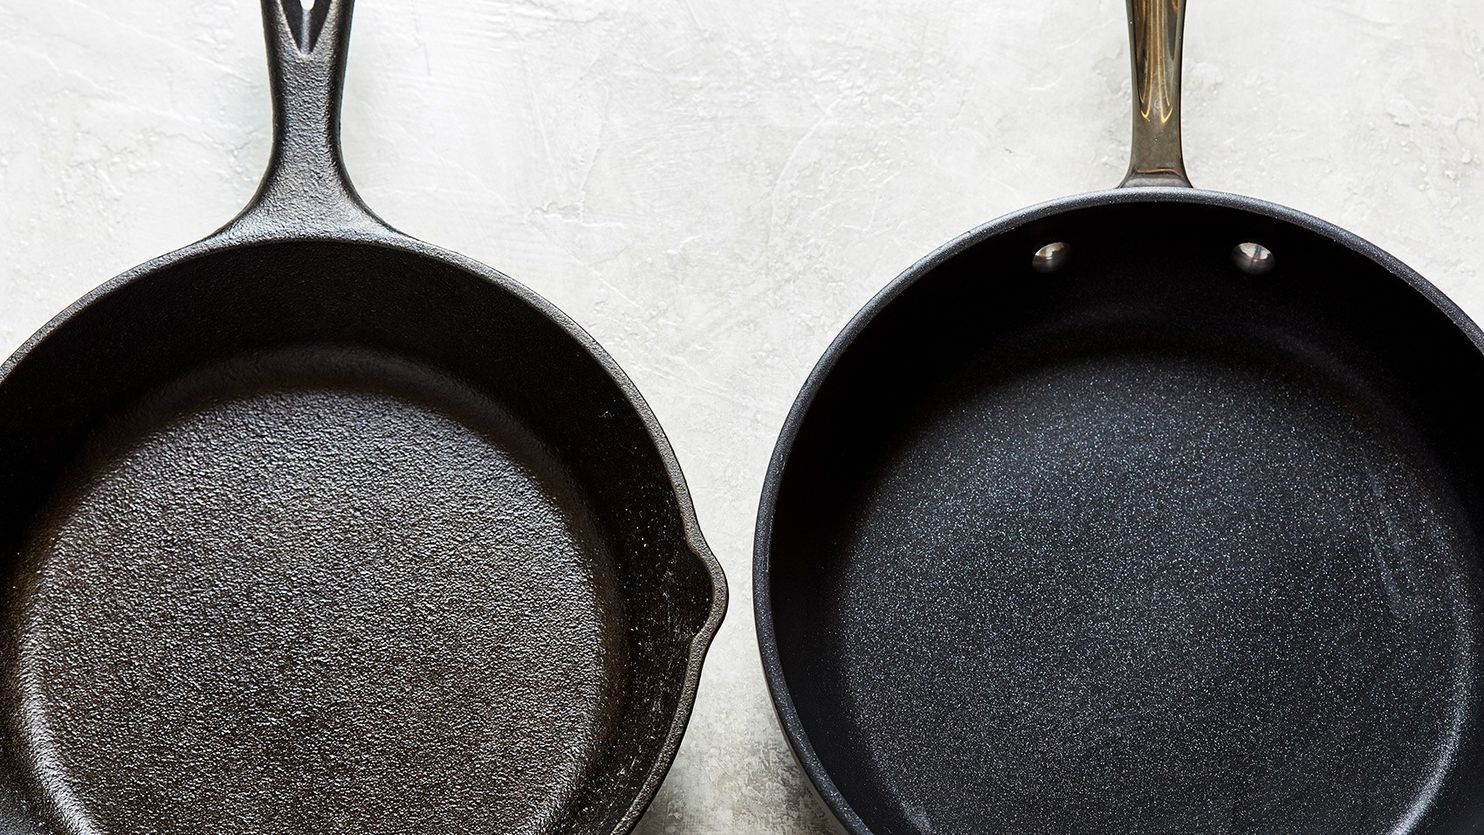 Iron Skillets vs Non-Stick vs Stainless Steel: Which One is Right for You?